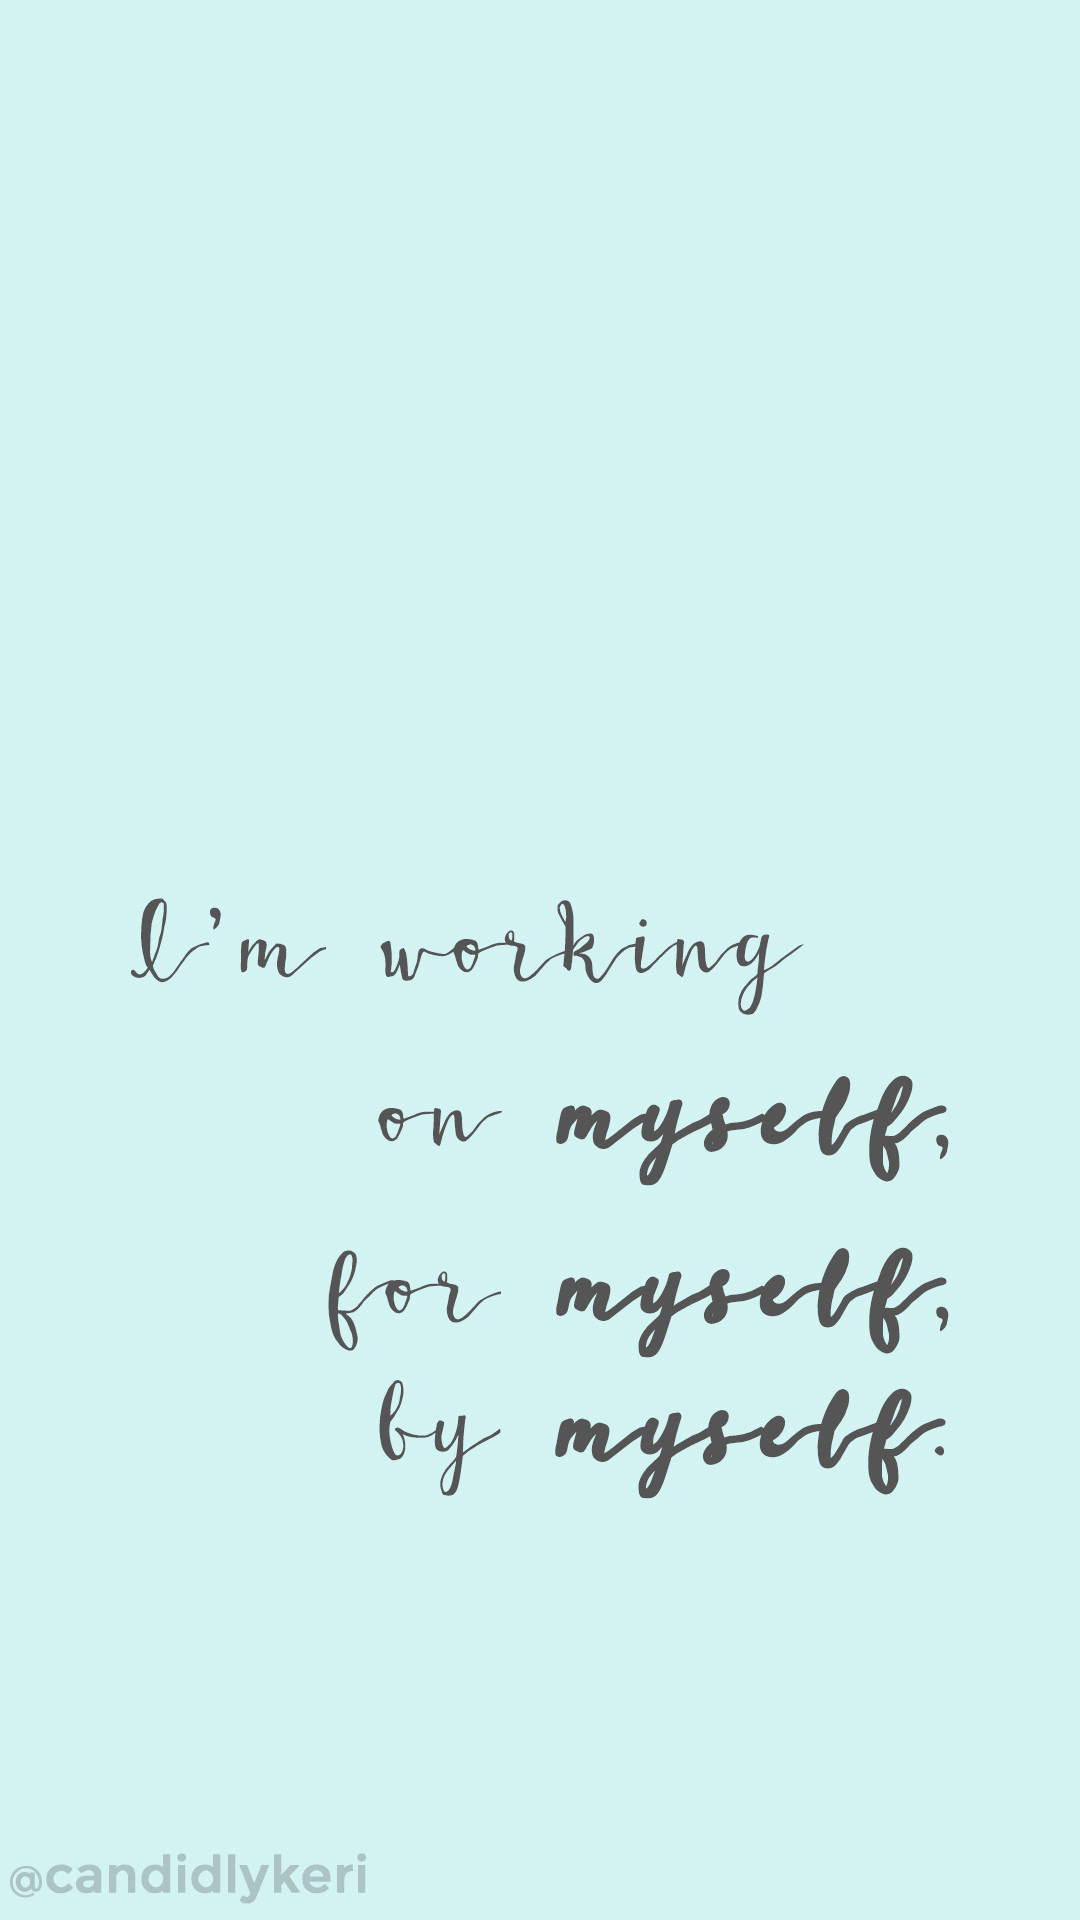 Im working on myself, by myself, for myself motivation inspirational quote wallpaper